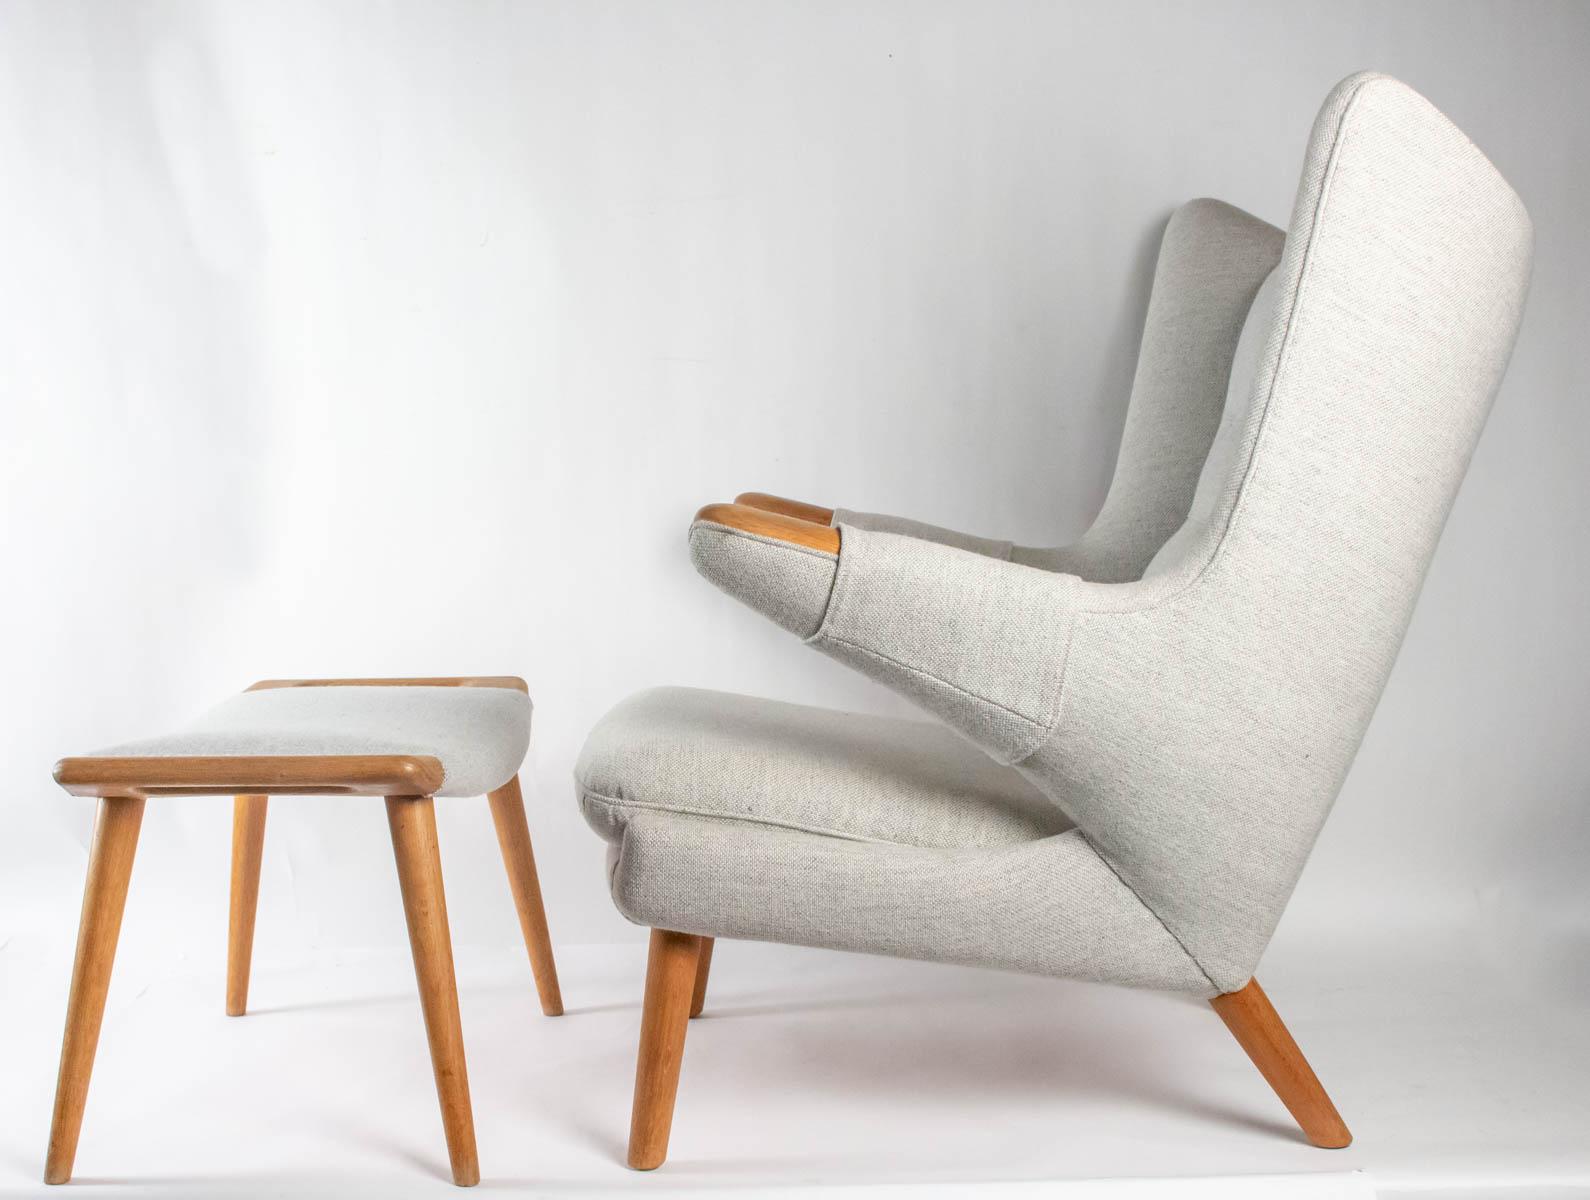 Iconic Papa Bear armchair with matching ottoman, for AP Stolen, Denmark, Hans Wegner, 1960s
Original frame 
Reupholstered in Fabric similar to original by Peer Brohl Mobelpolstring (original upholsterer)
Armchair:
Dimension: H 96 cm, D 92cm, W